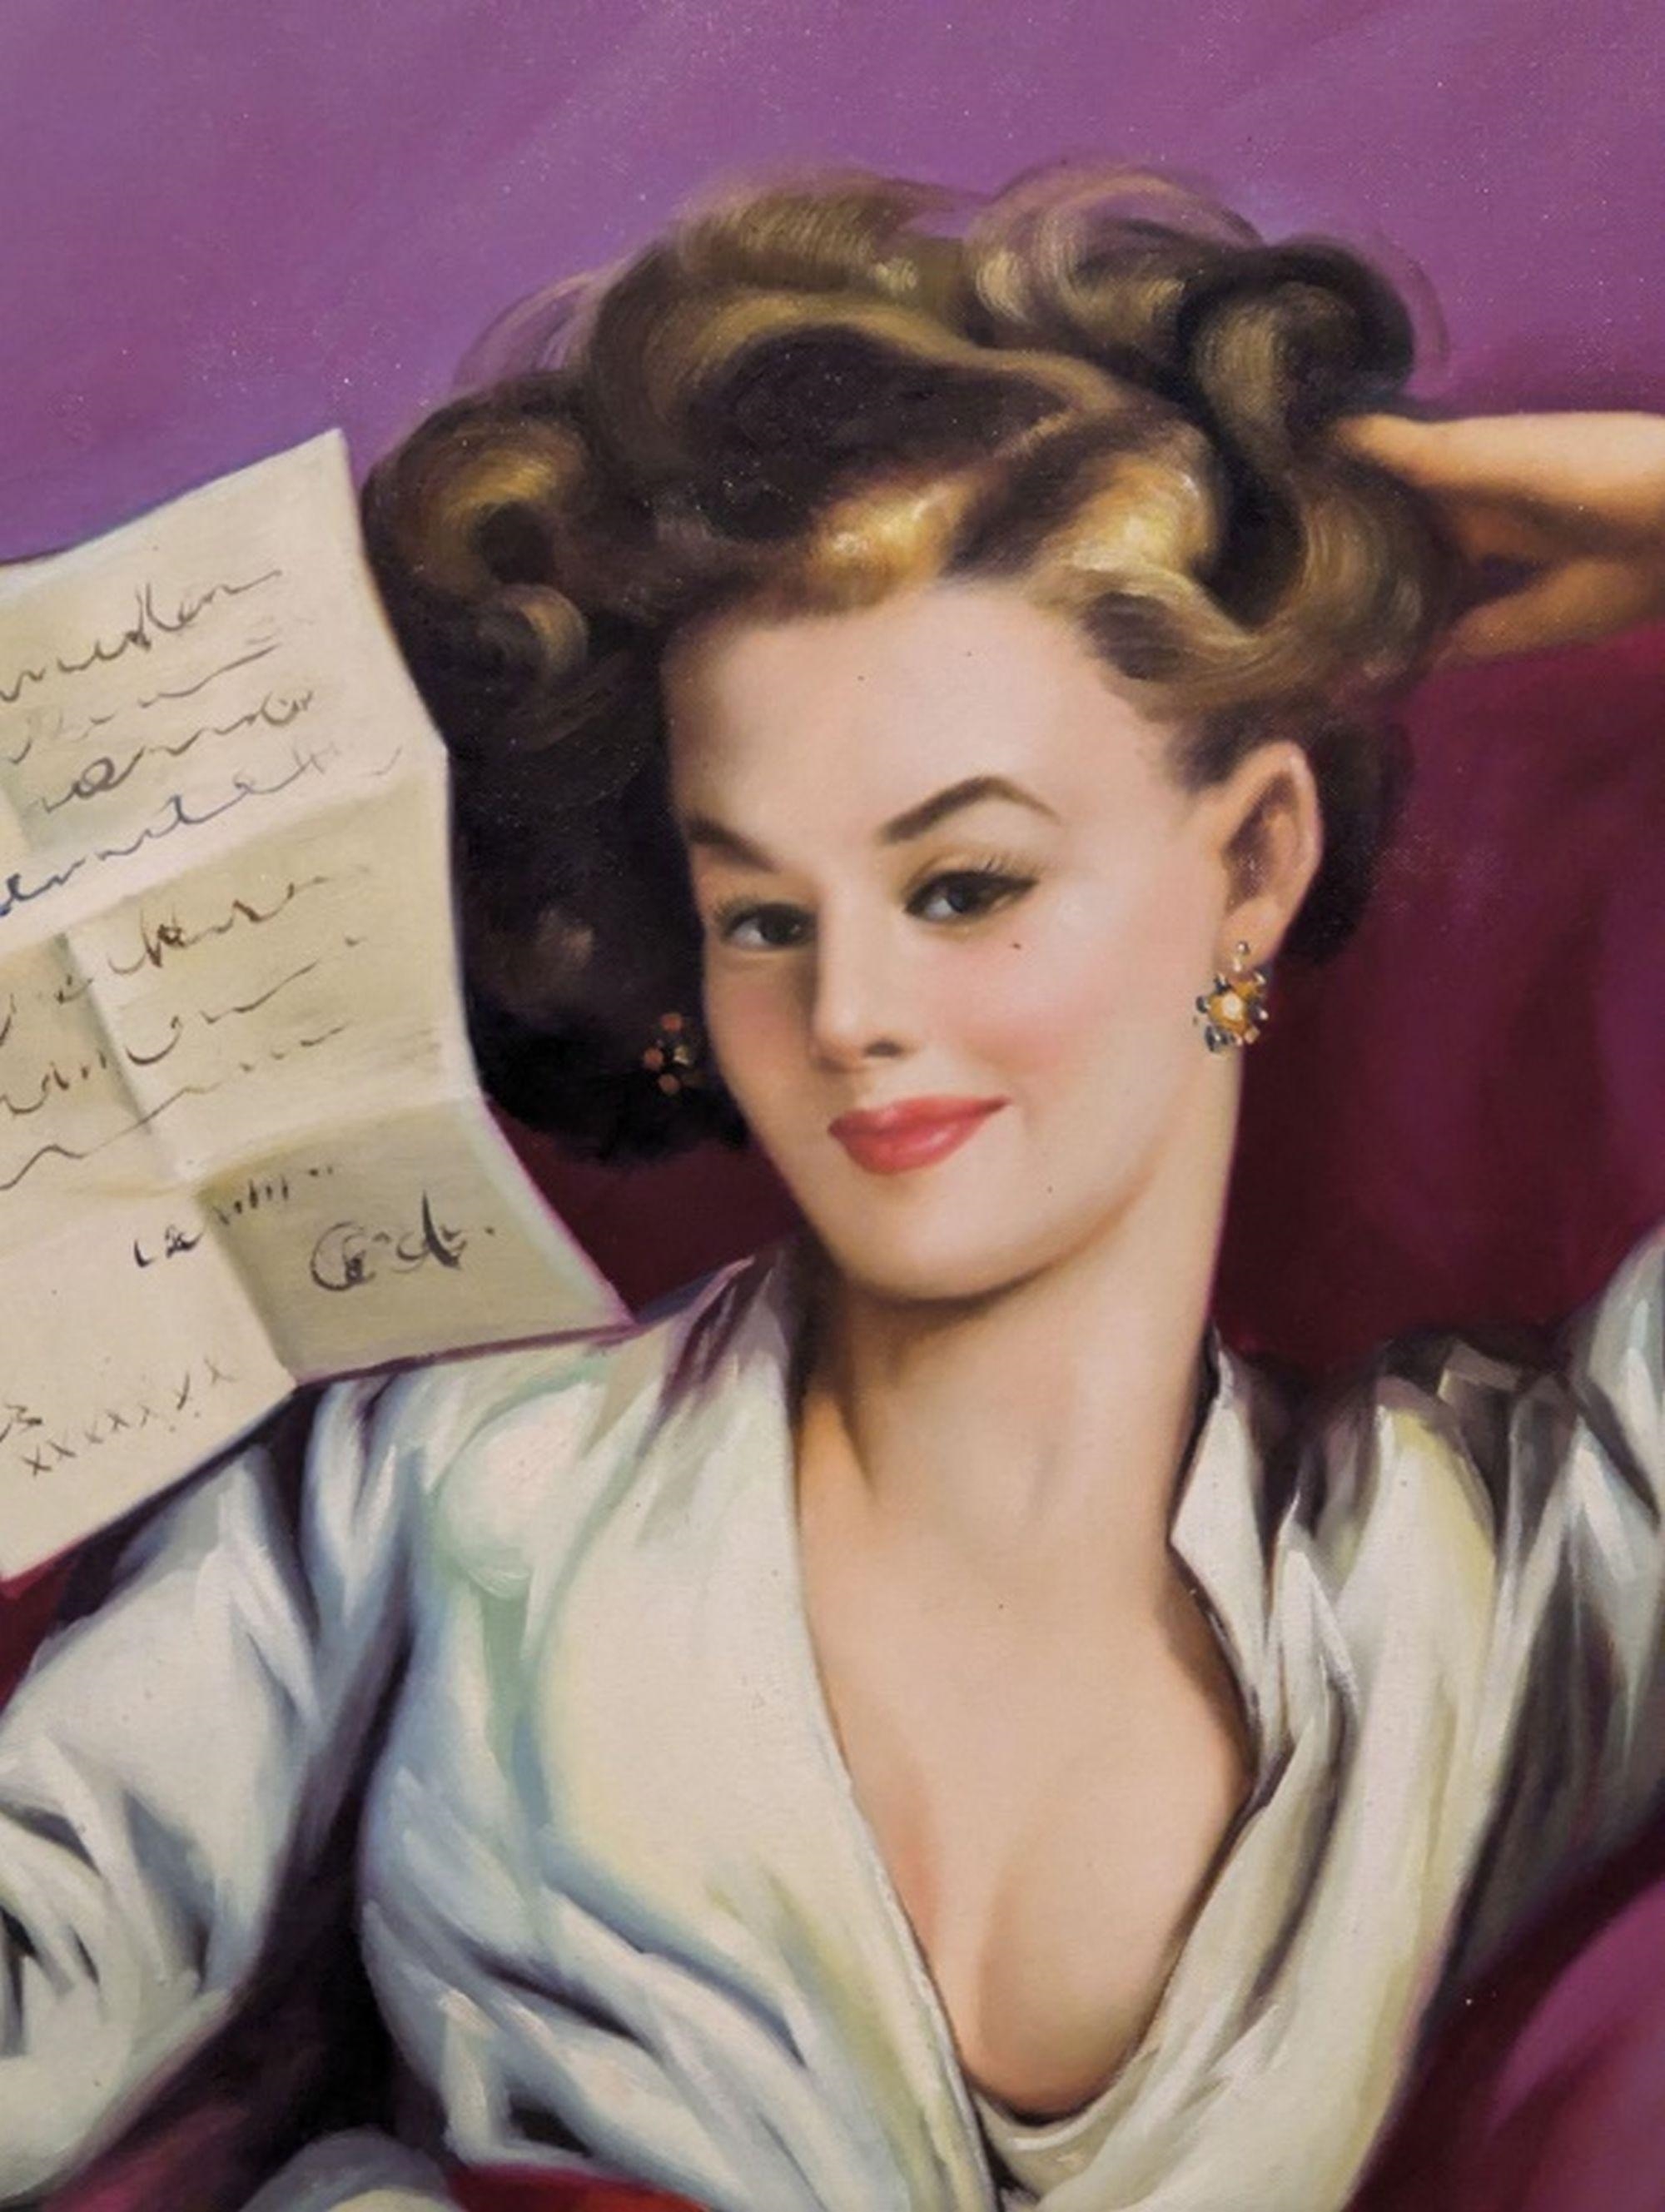 Artwork by Gil Elvgren, Pin-up girl, Made of Acrylic on canvas